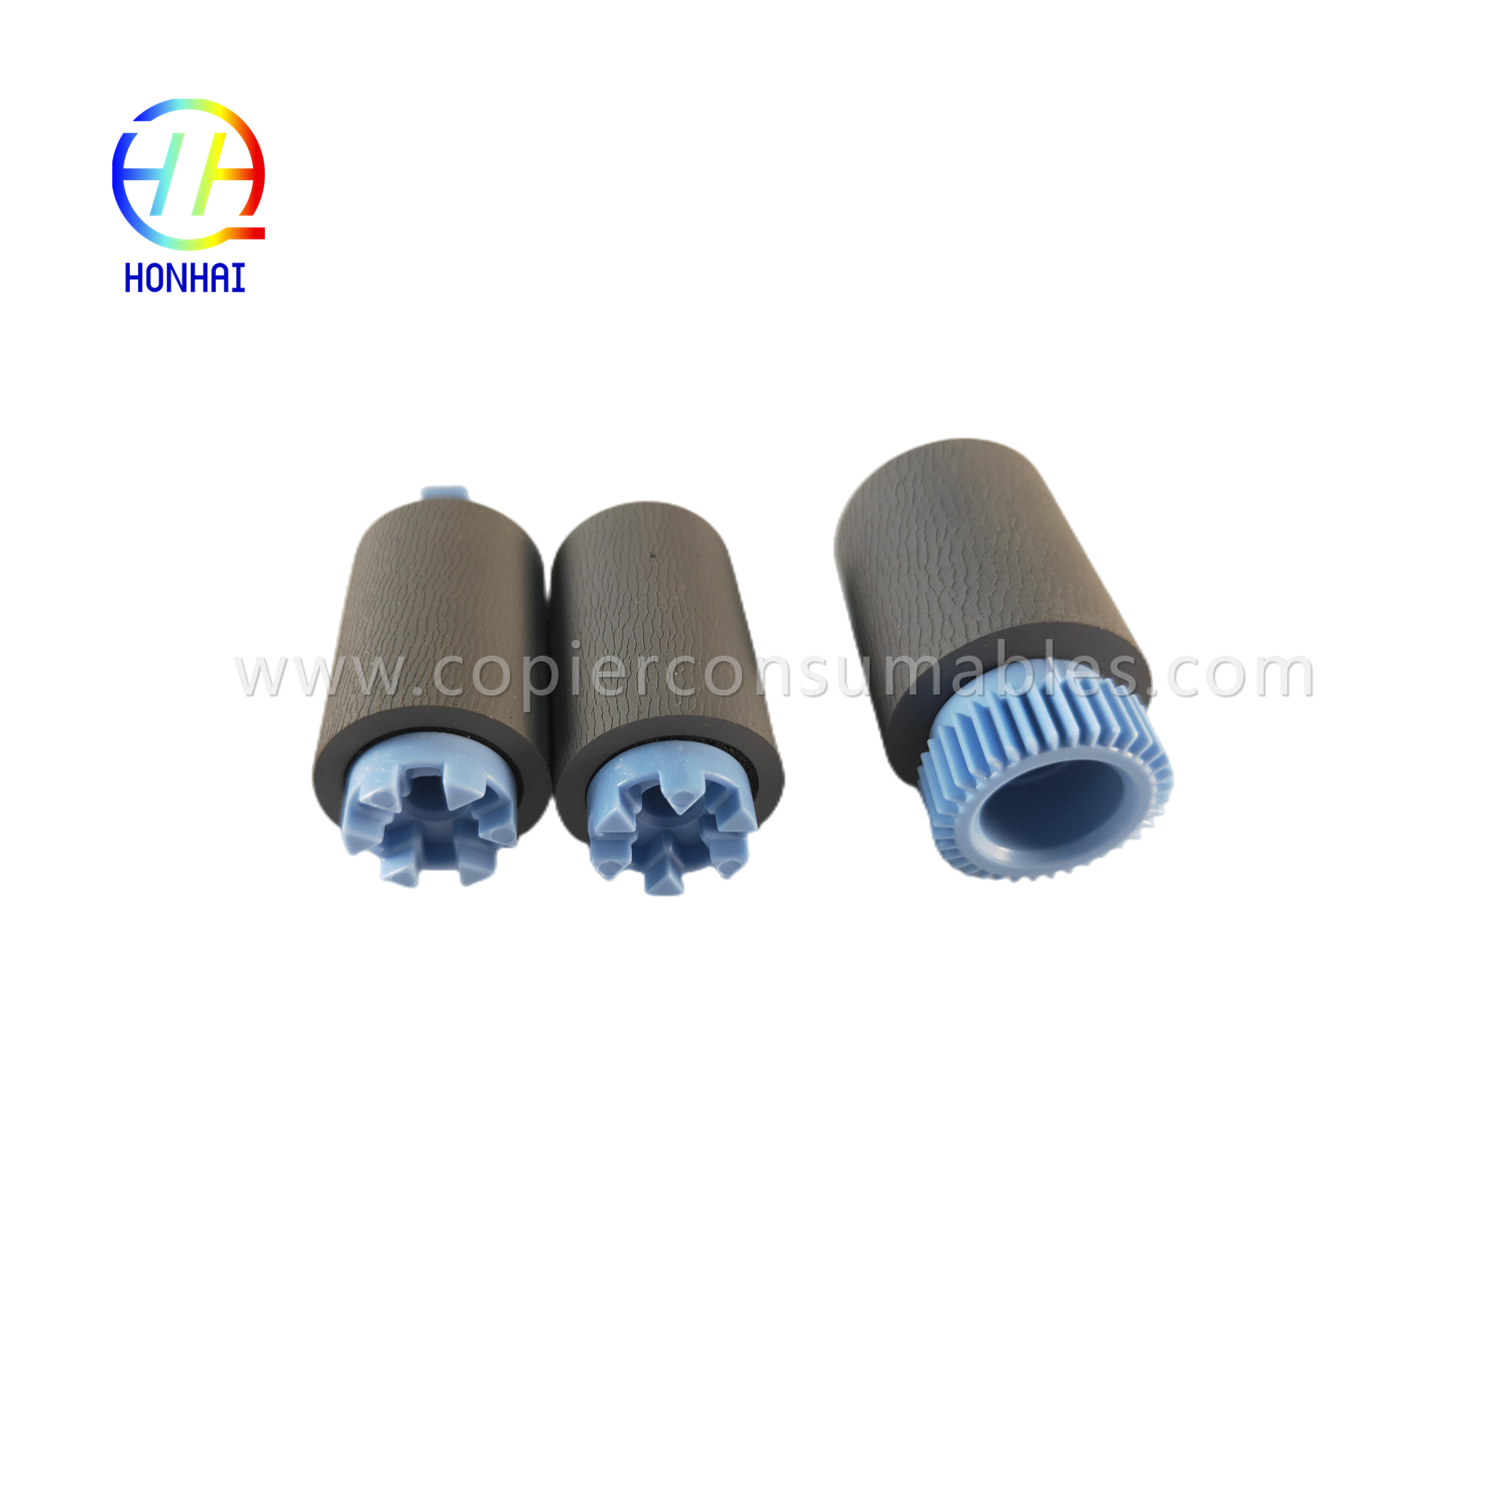 https://www.copierconsumables.com/tray-2-5-pickup-feed-separation-roller-set-for-hp-a7w93-67082-mfp-785f-780dn-e77650z-e77660z-e77650dn-e77660dn-p77740dn- p77750z-p77760z-p75050dn-p75050dw-produkt/